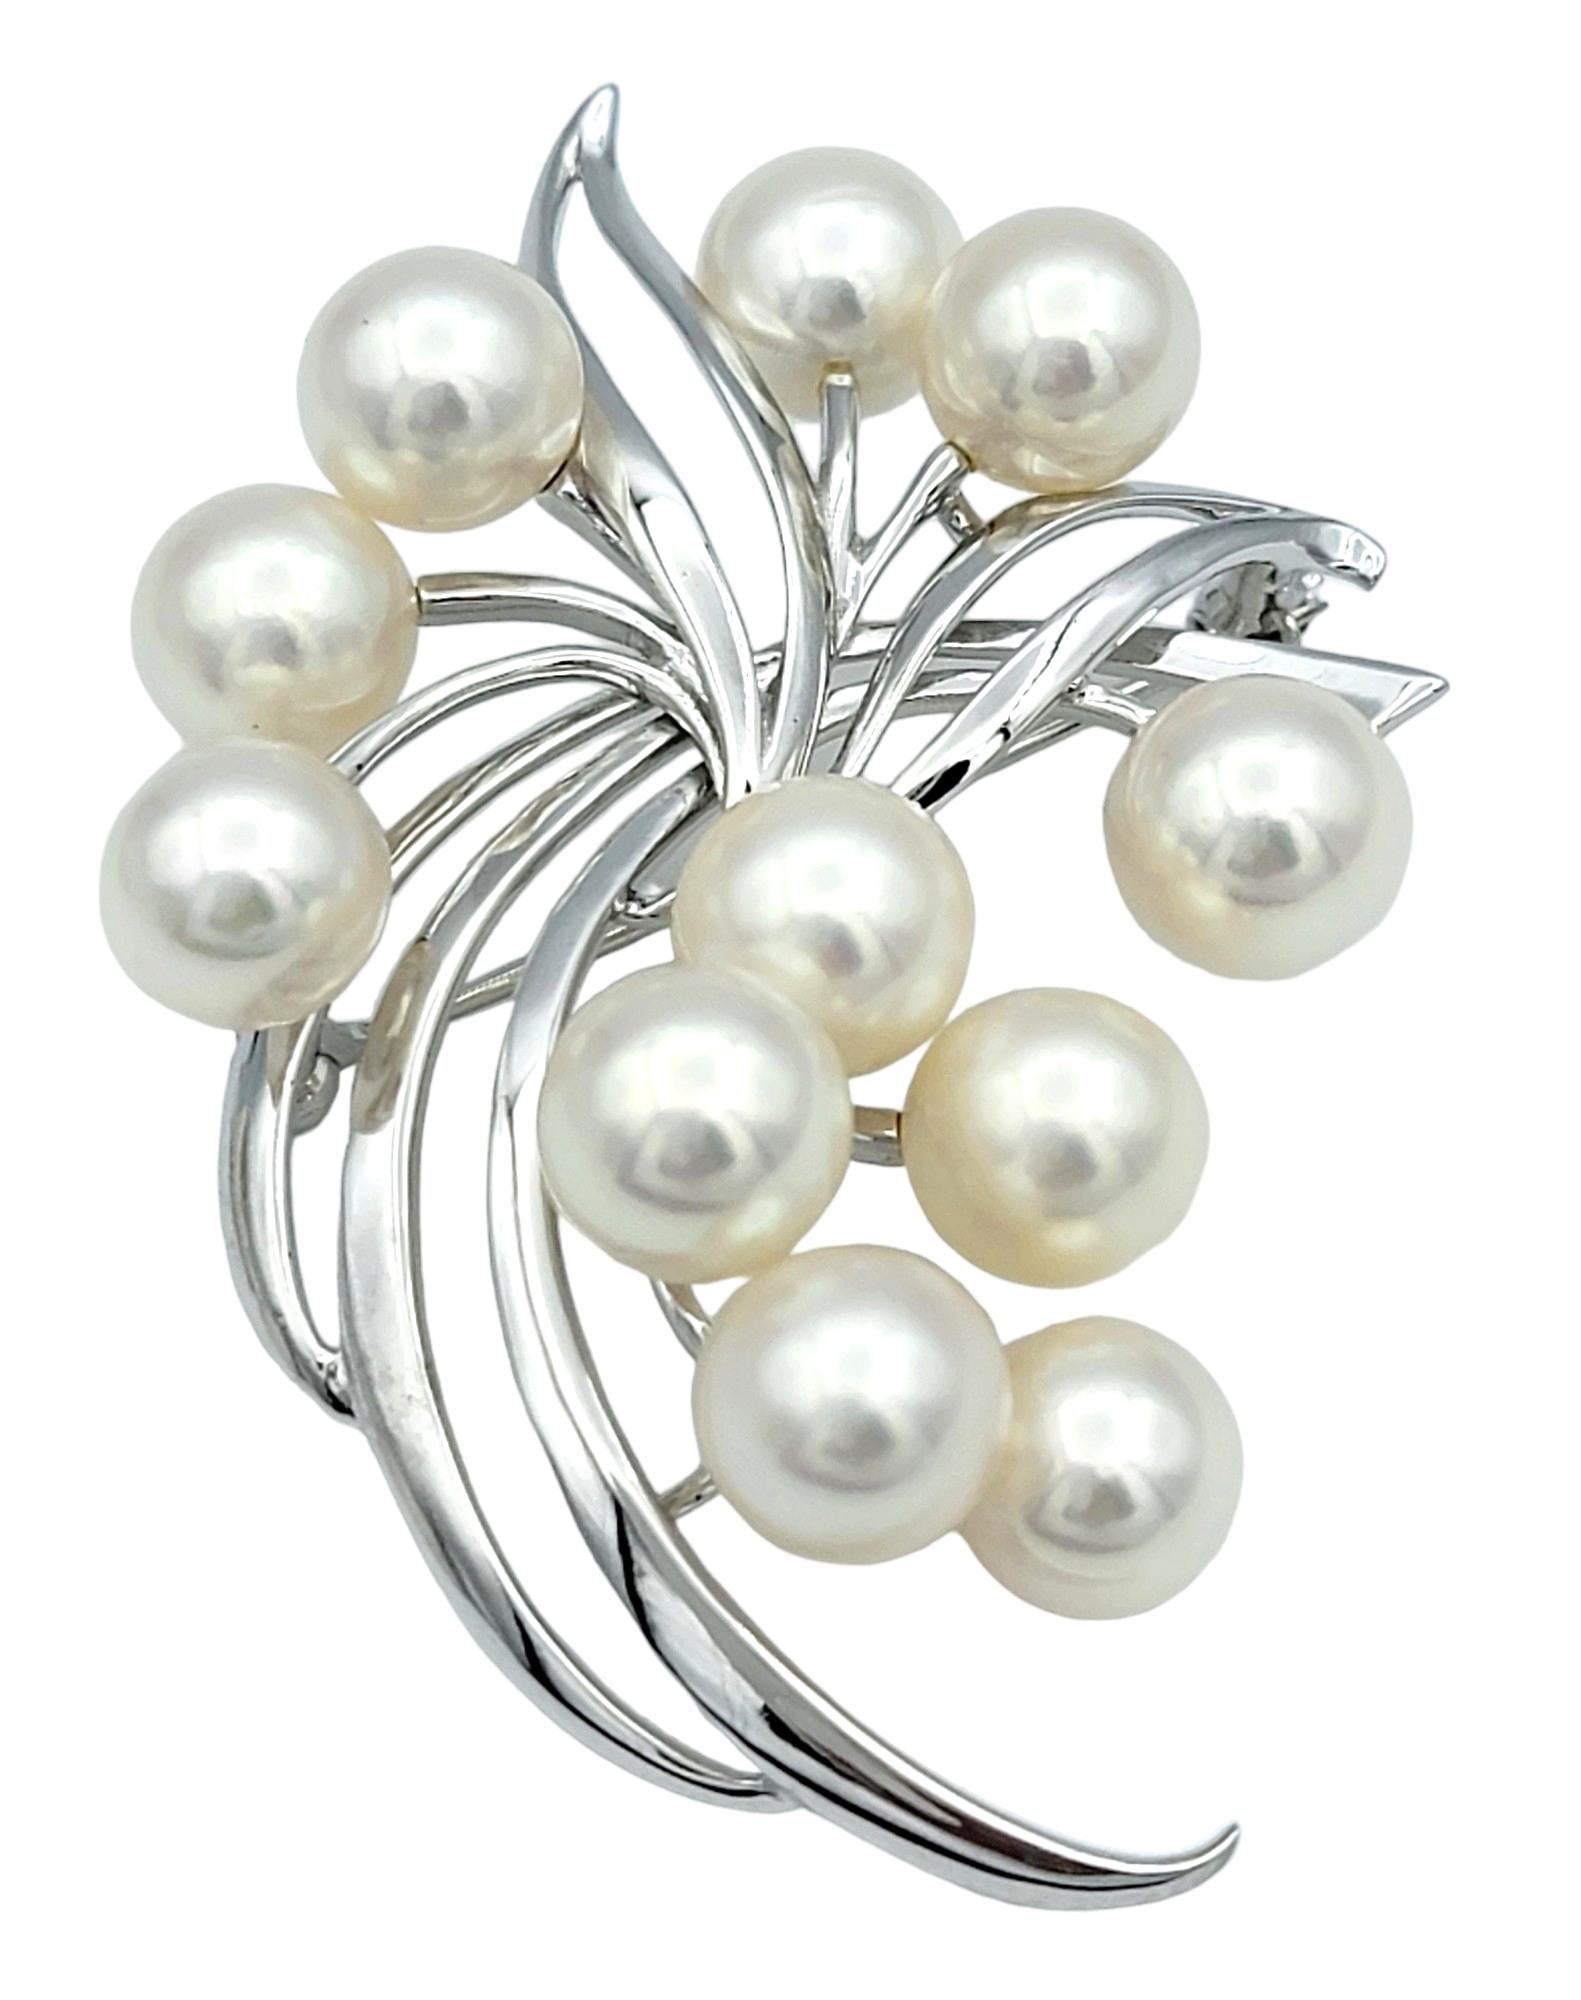 This lovely Mikimoto brooch features exquisite akoya cultured pearls set in lustrous 14 karat white gold. The brooch design showcases the timeless elegance of pearls, with each pearl carefully selected for its quality and luster.

Set in a delicate